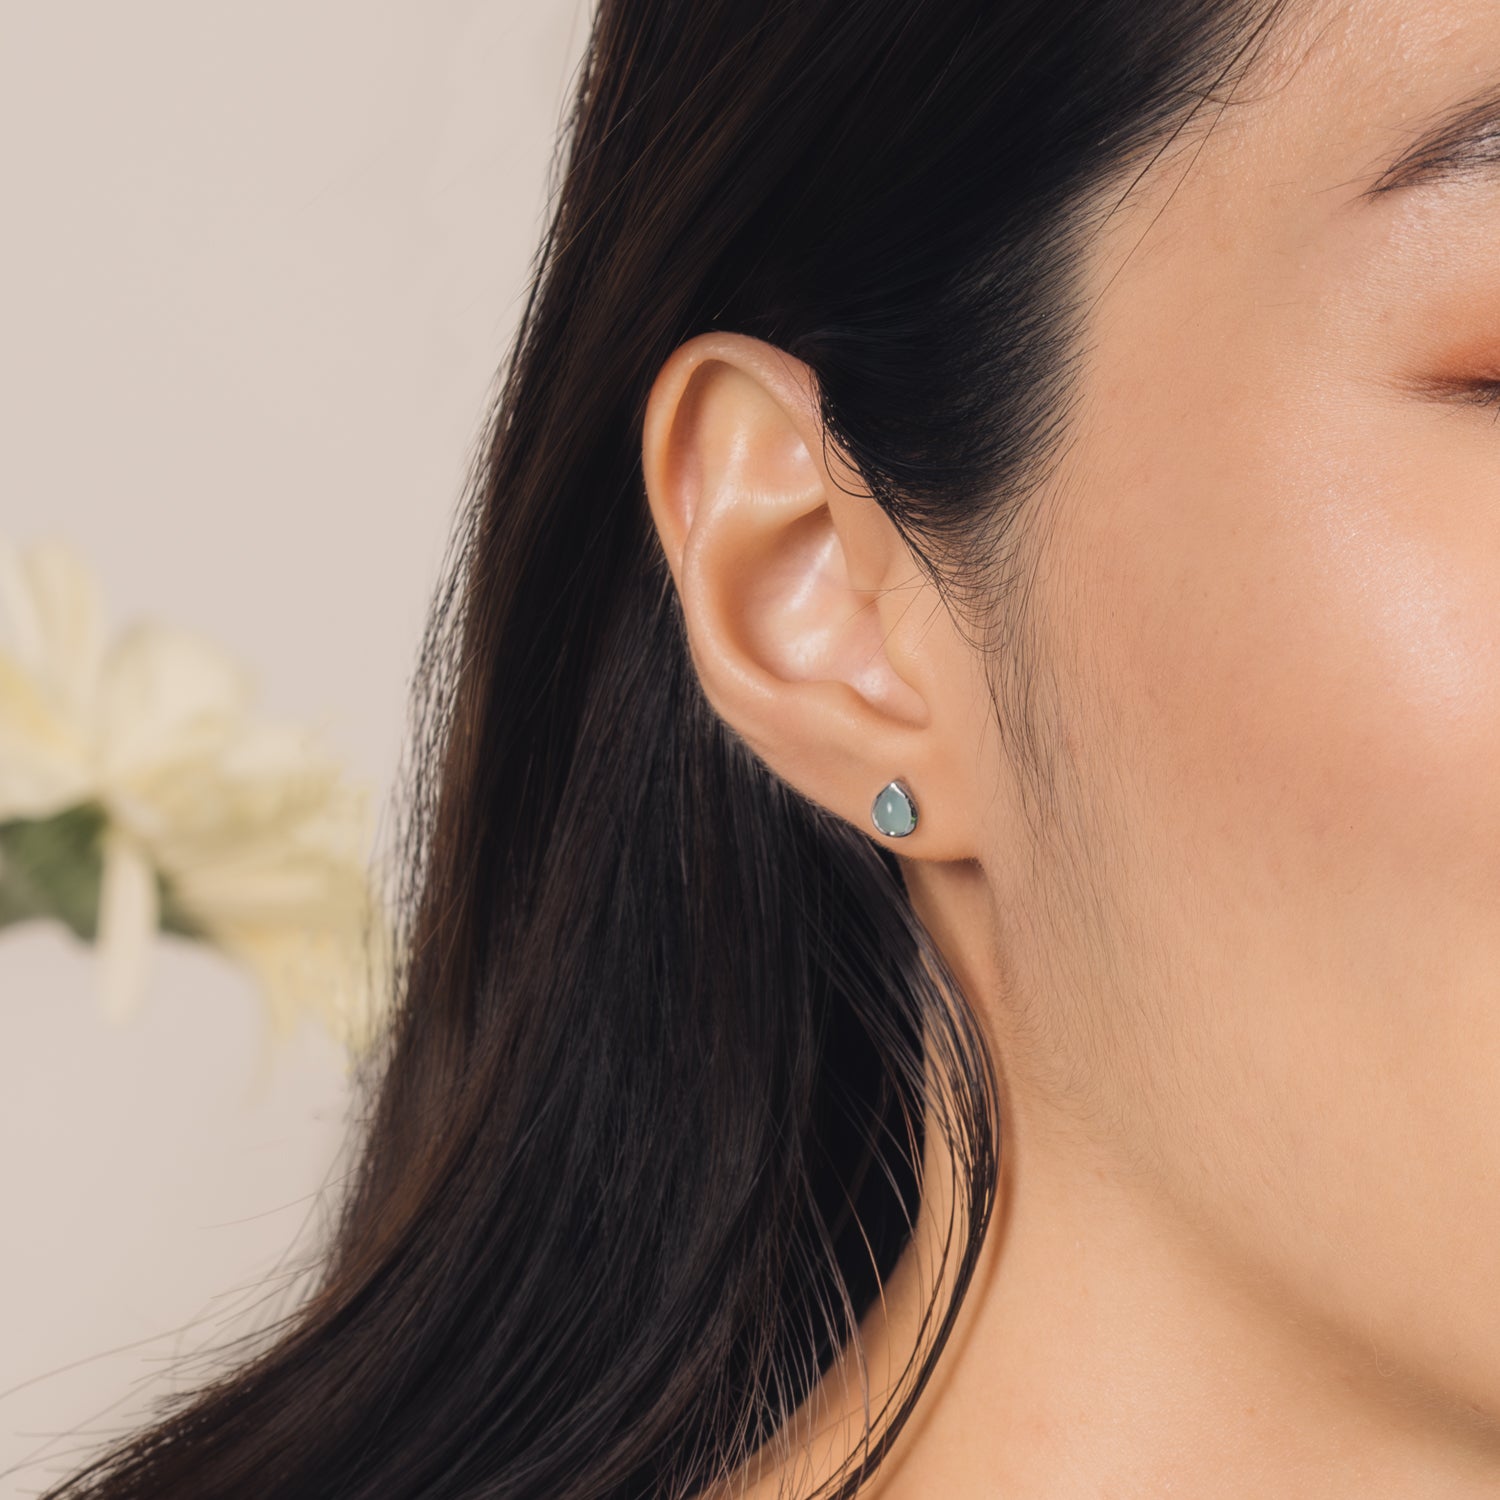 Fine and dainty studs. Model is wearing solid white gold earrings set with chalcedony gemstones